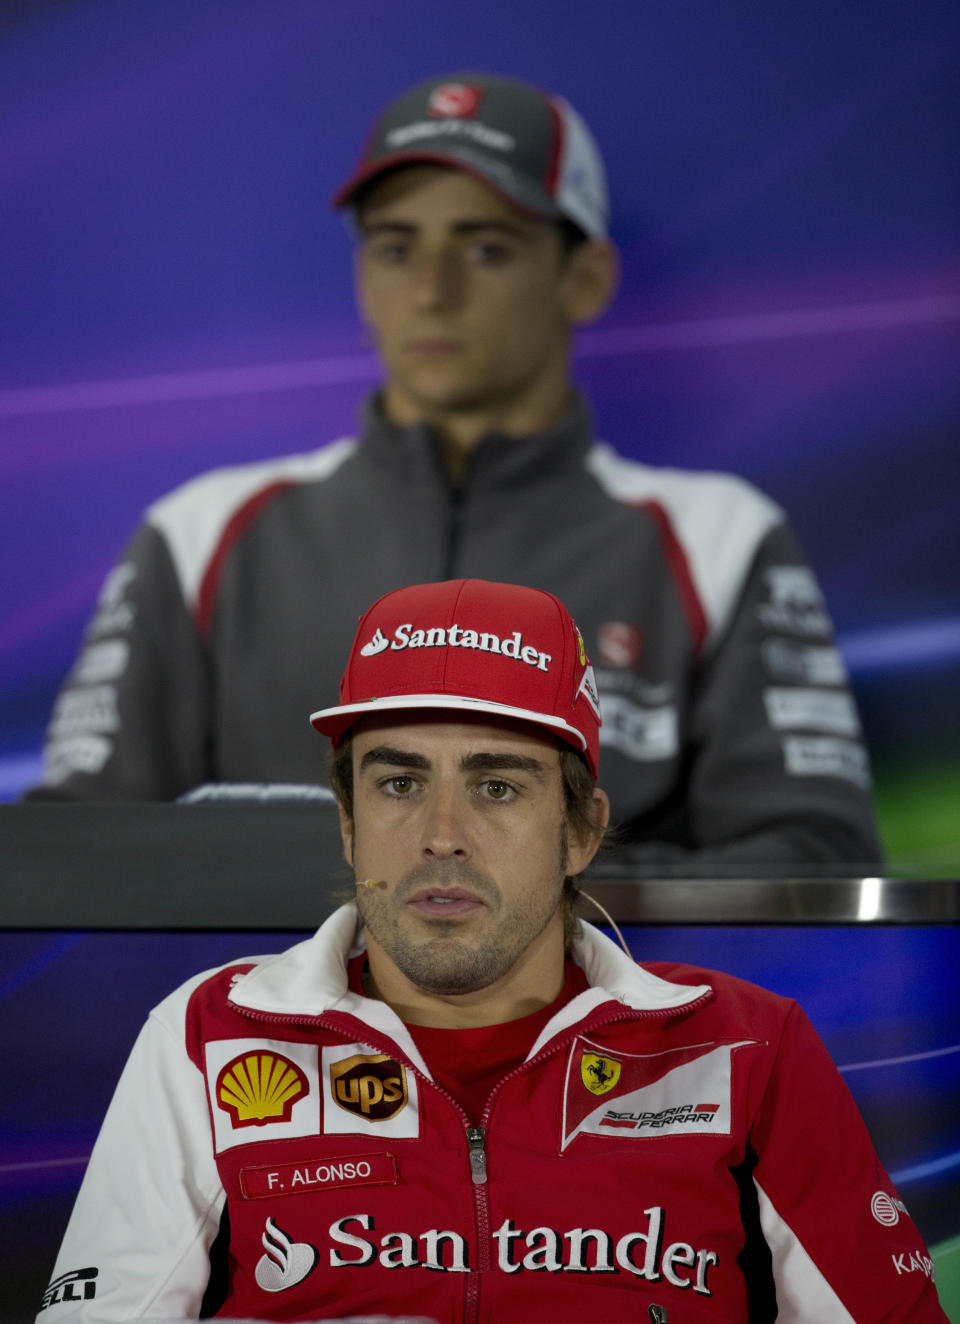 Ferrari driver Fernando Alonso of Spain, speaks in front of Sauber driver Esteban Gutierrez of Mexico during the press conference ahead of Sunday's Chinese Formula One Grand Prix at Shanghai International Circuit in Shanghai, China Thursday, April 17, 2014. (AP Photo/Andy Wong)